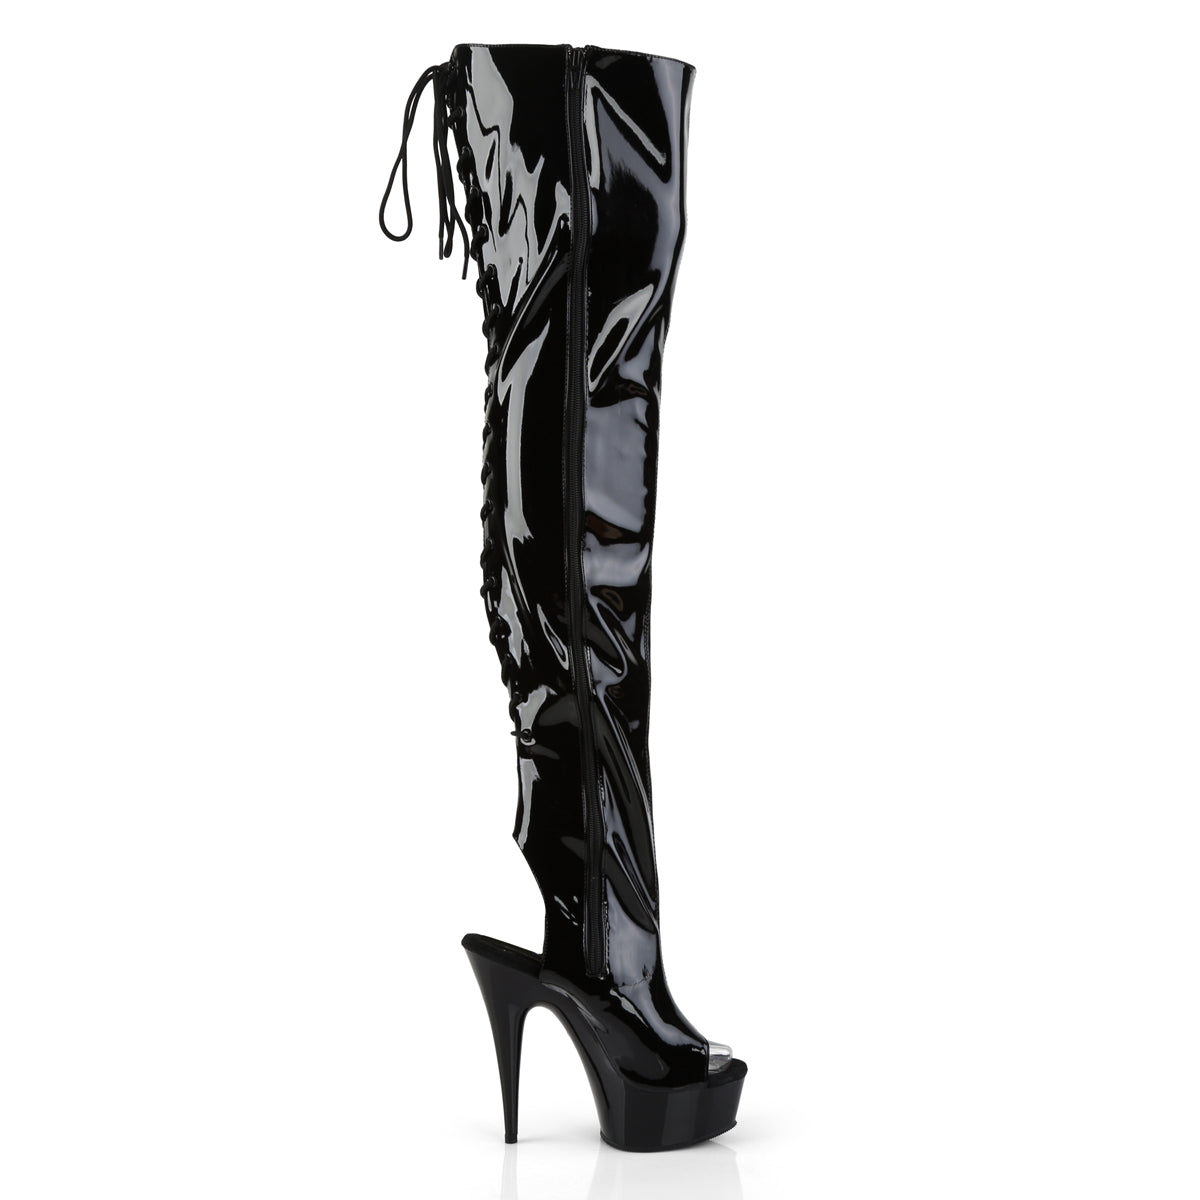 DELIGHT-3017 Black Thigh High Boots  Multi view 2